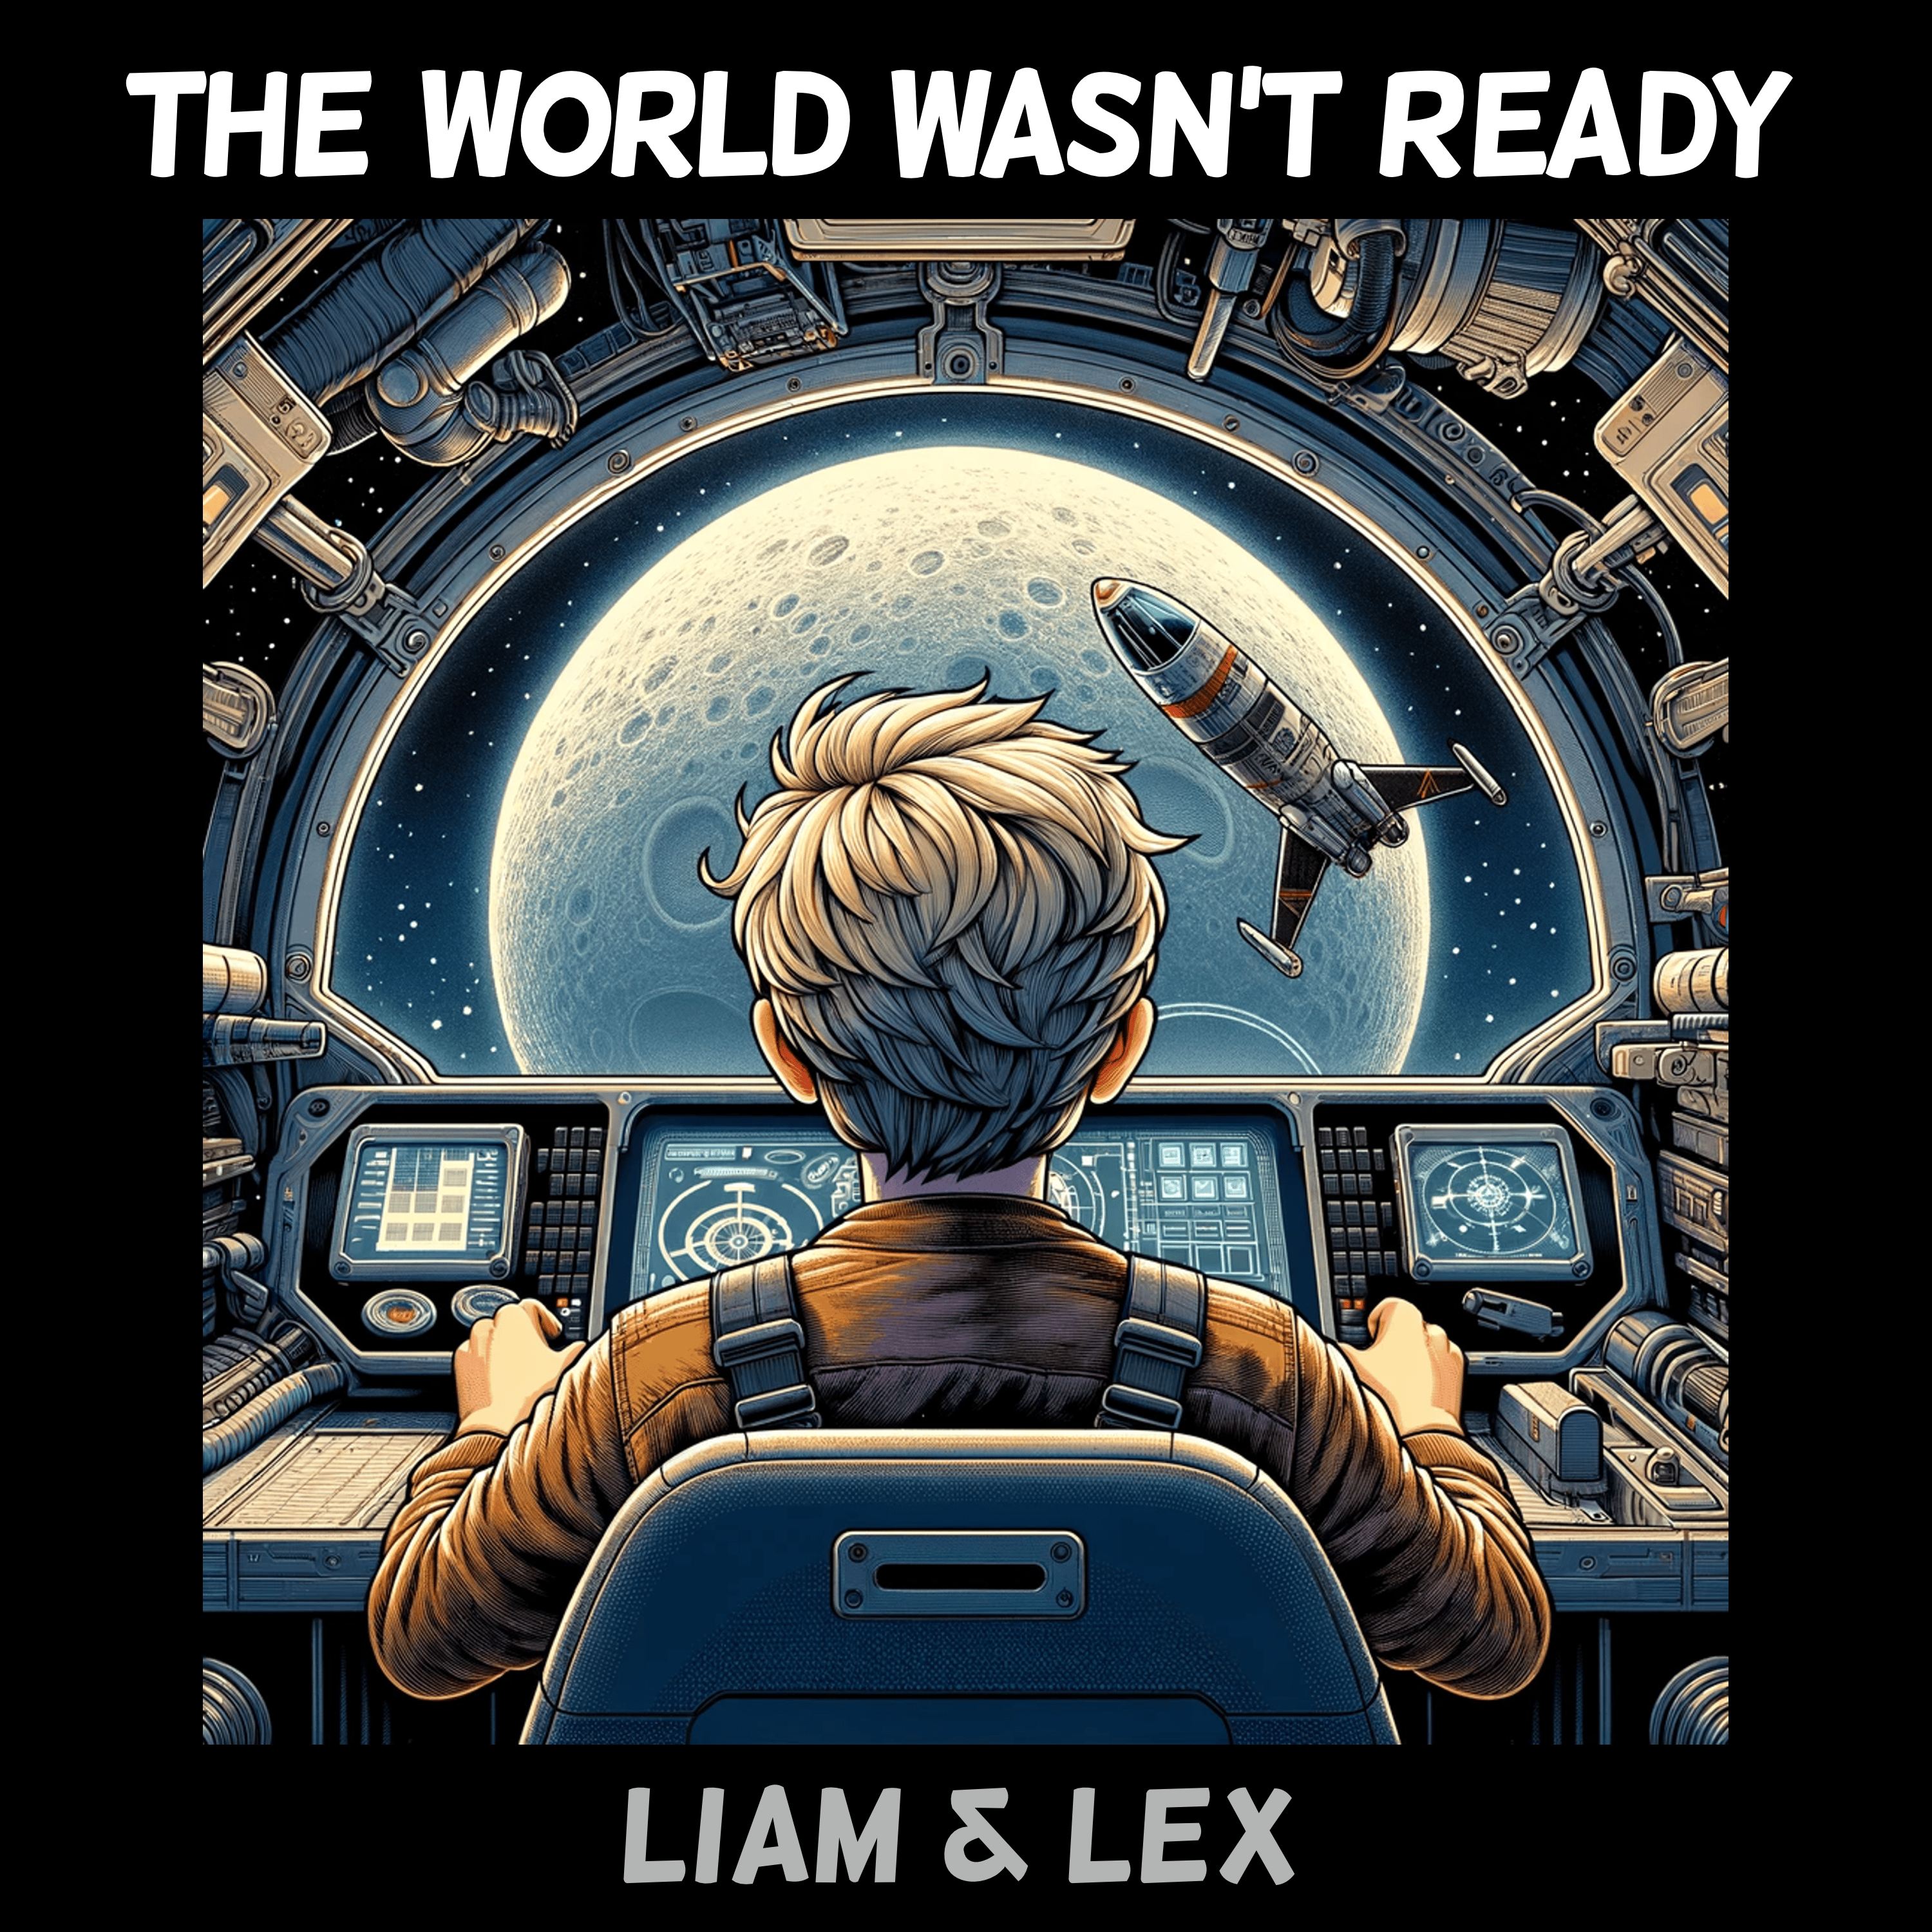 The World Wasn't Ready album cover: Blonde haired boy piloting a spaceship